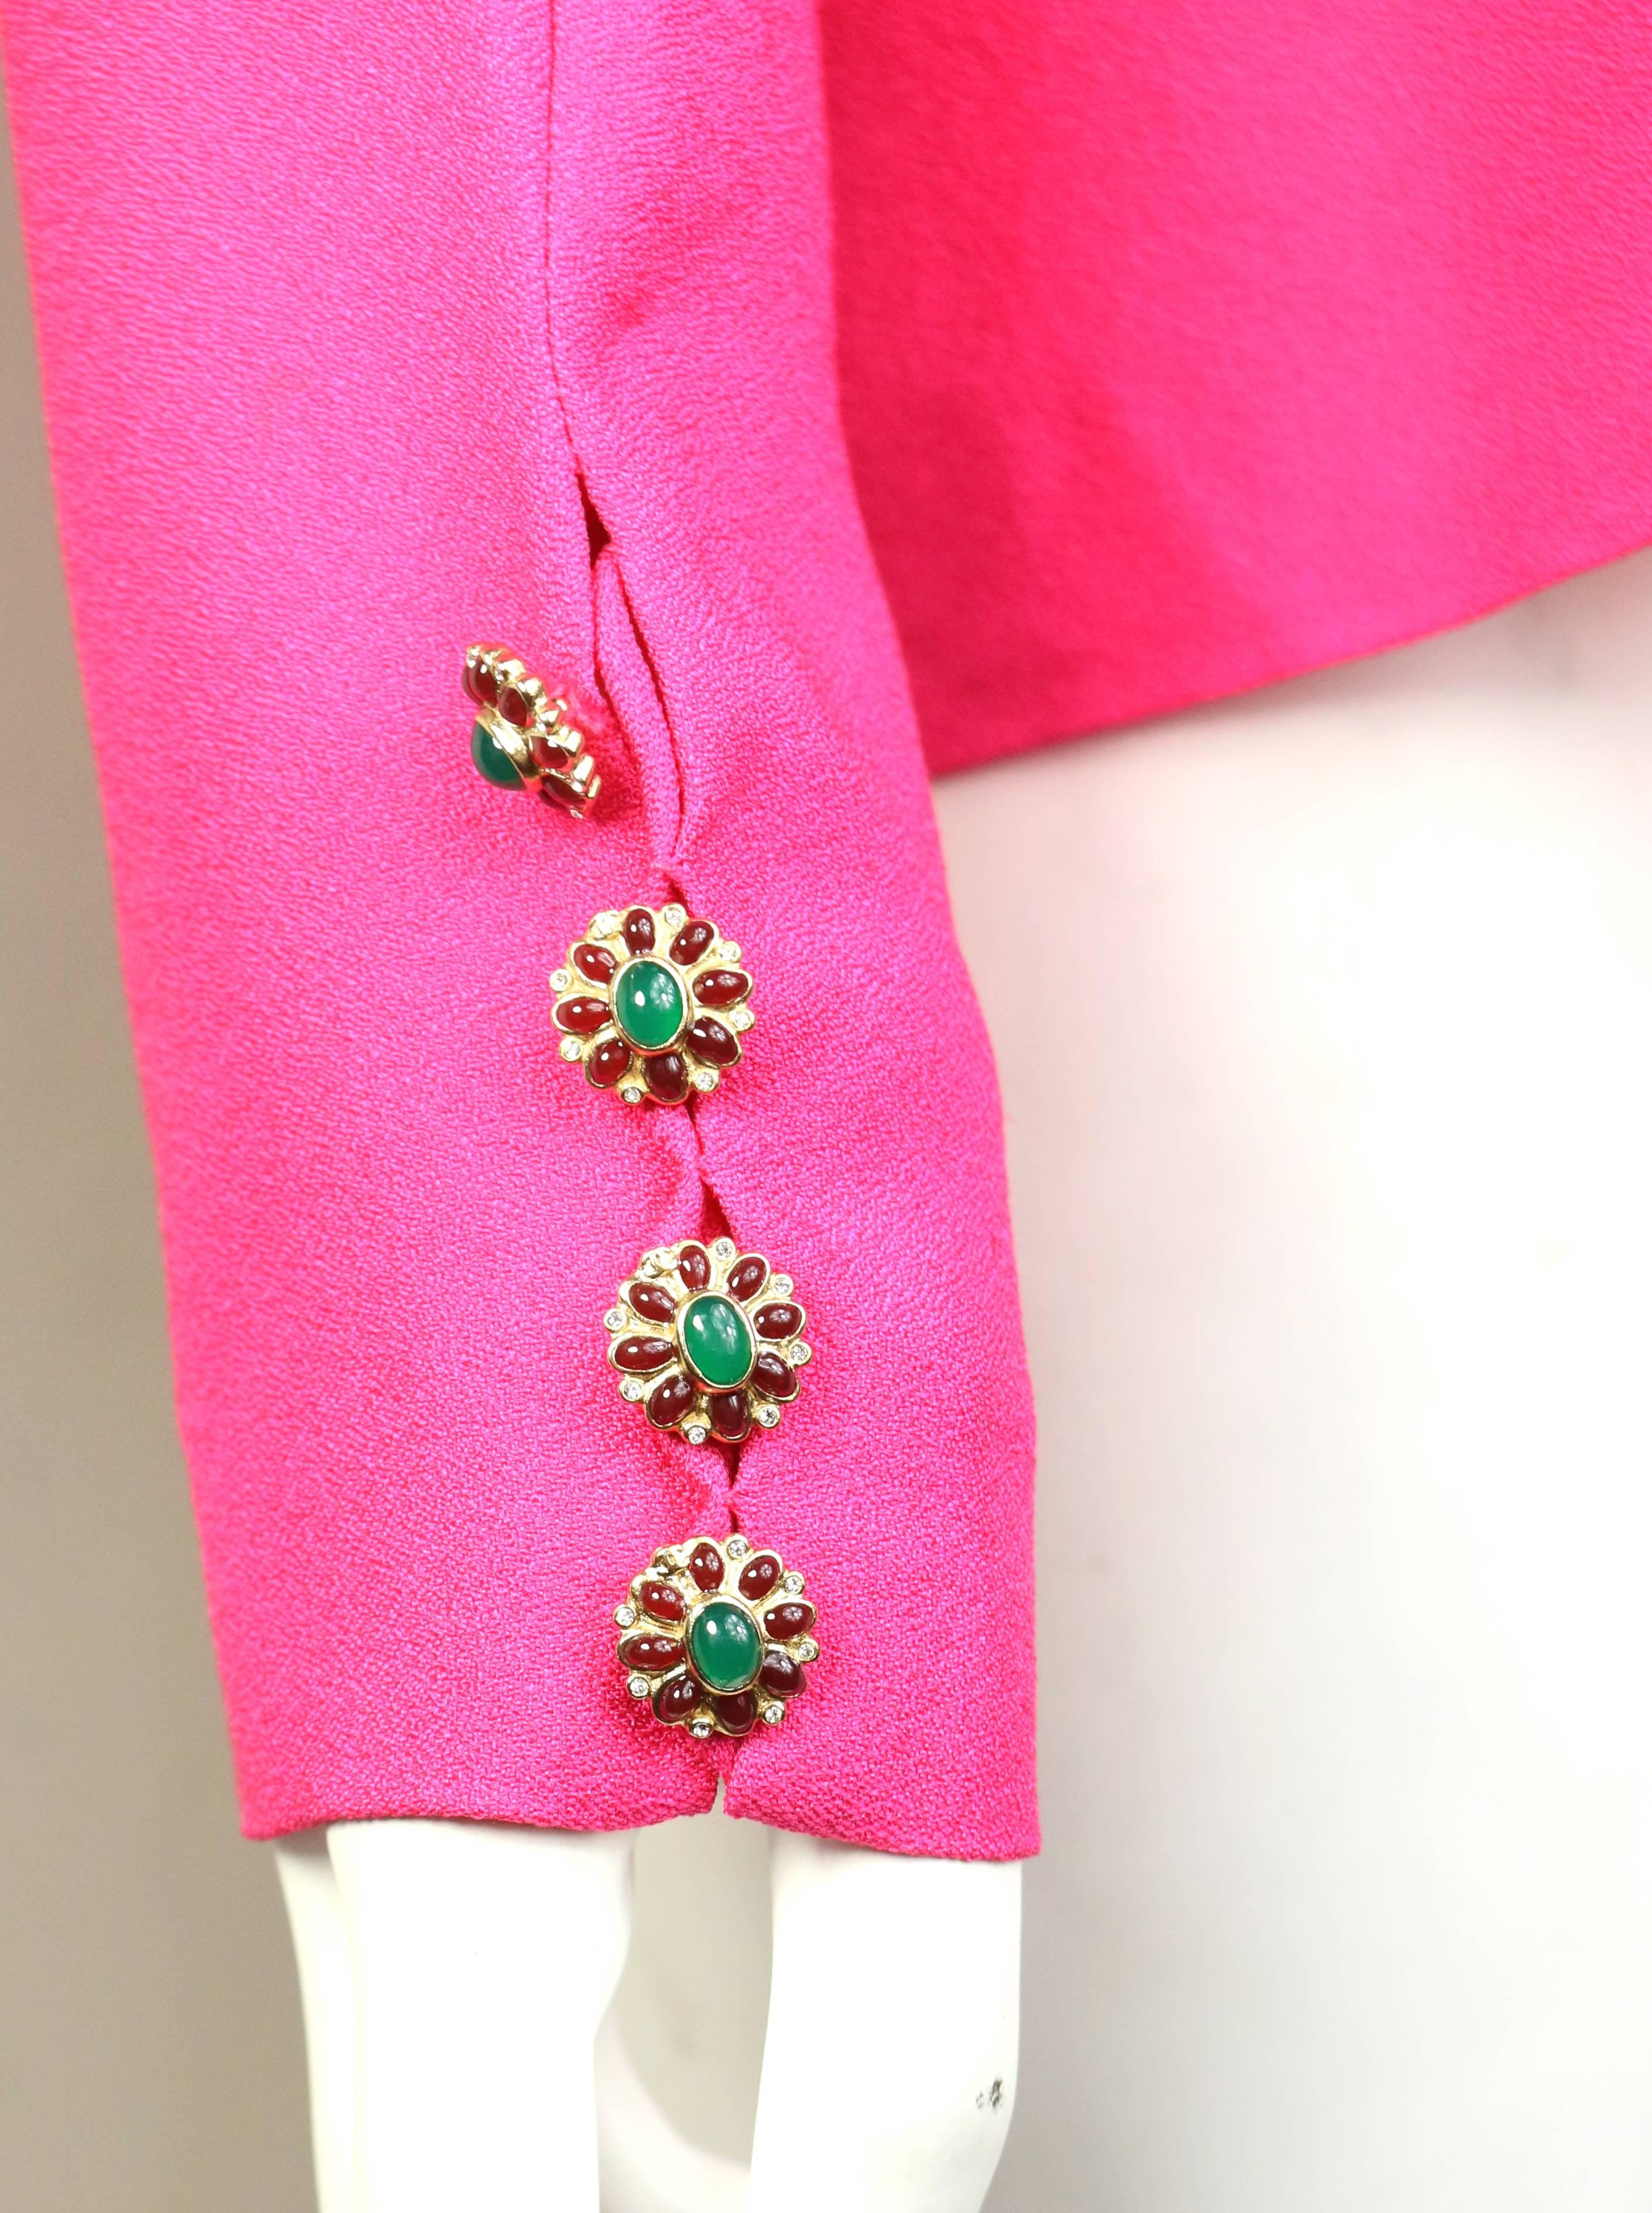 Chanel Fuchsia Pink Silk Shirt with Back Gripoix buttons For Sale at ...